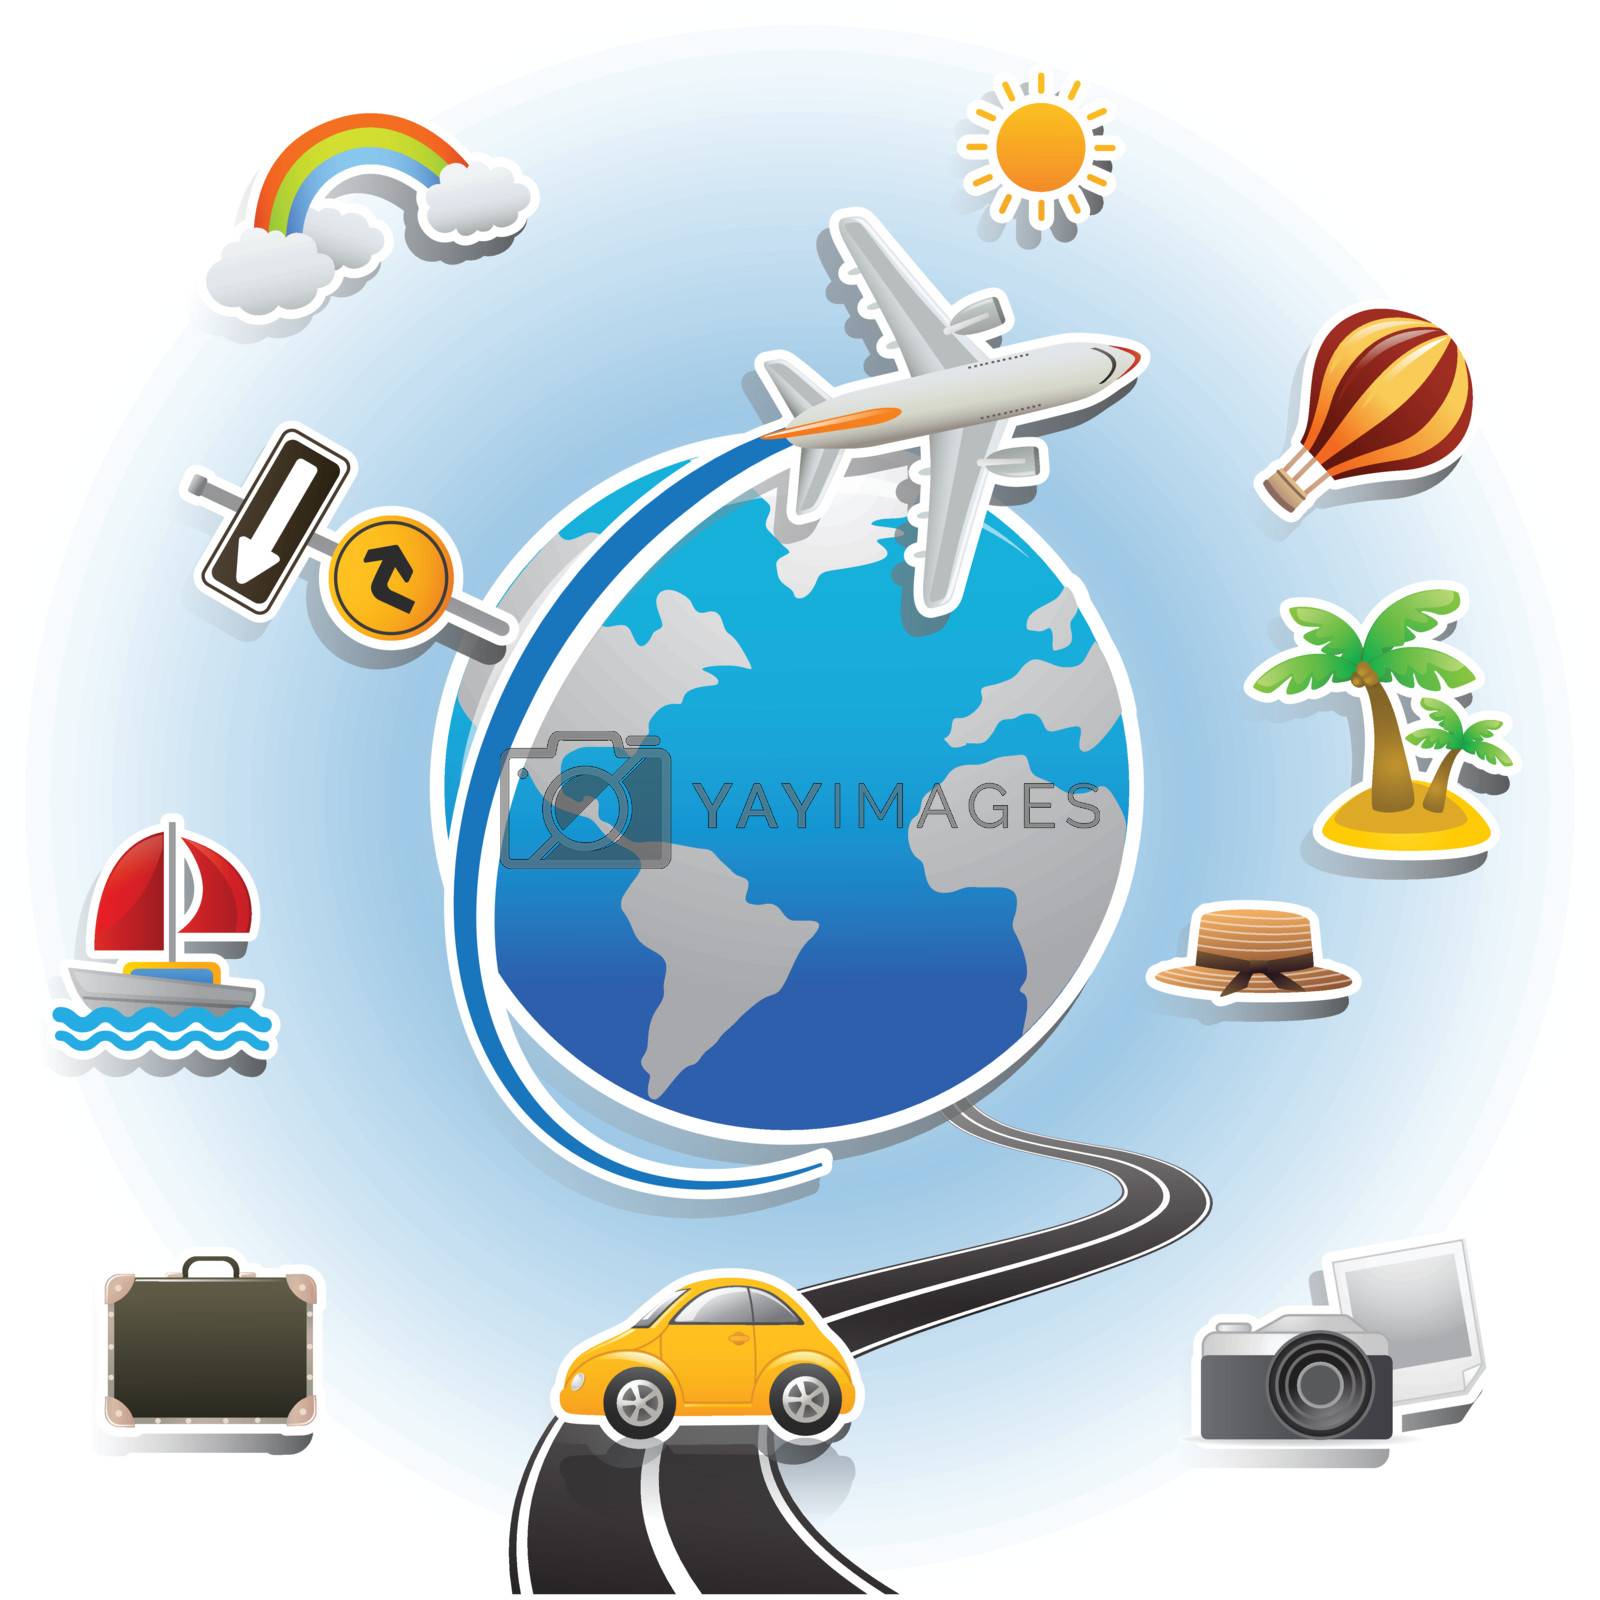 Royalty free image of Travel icons symbol collection by nirots